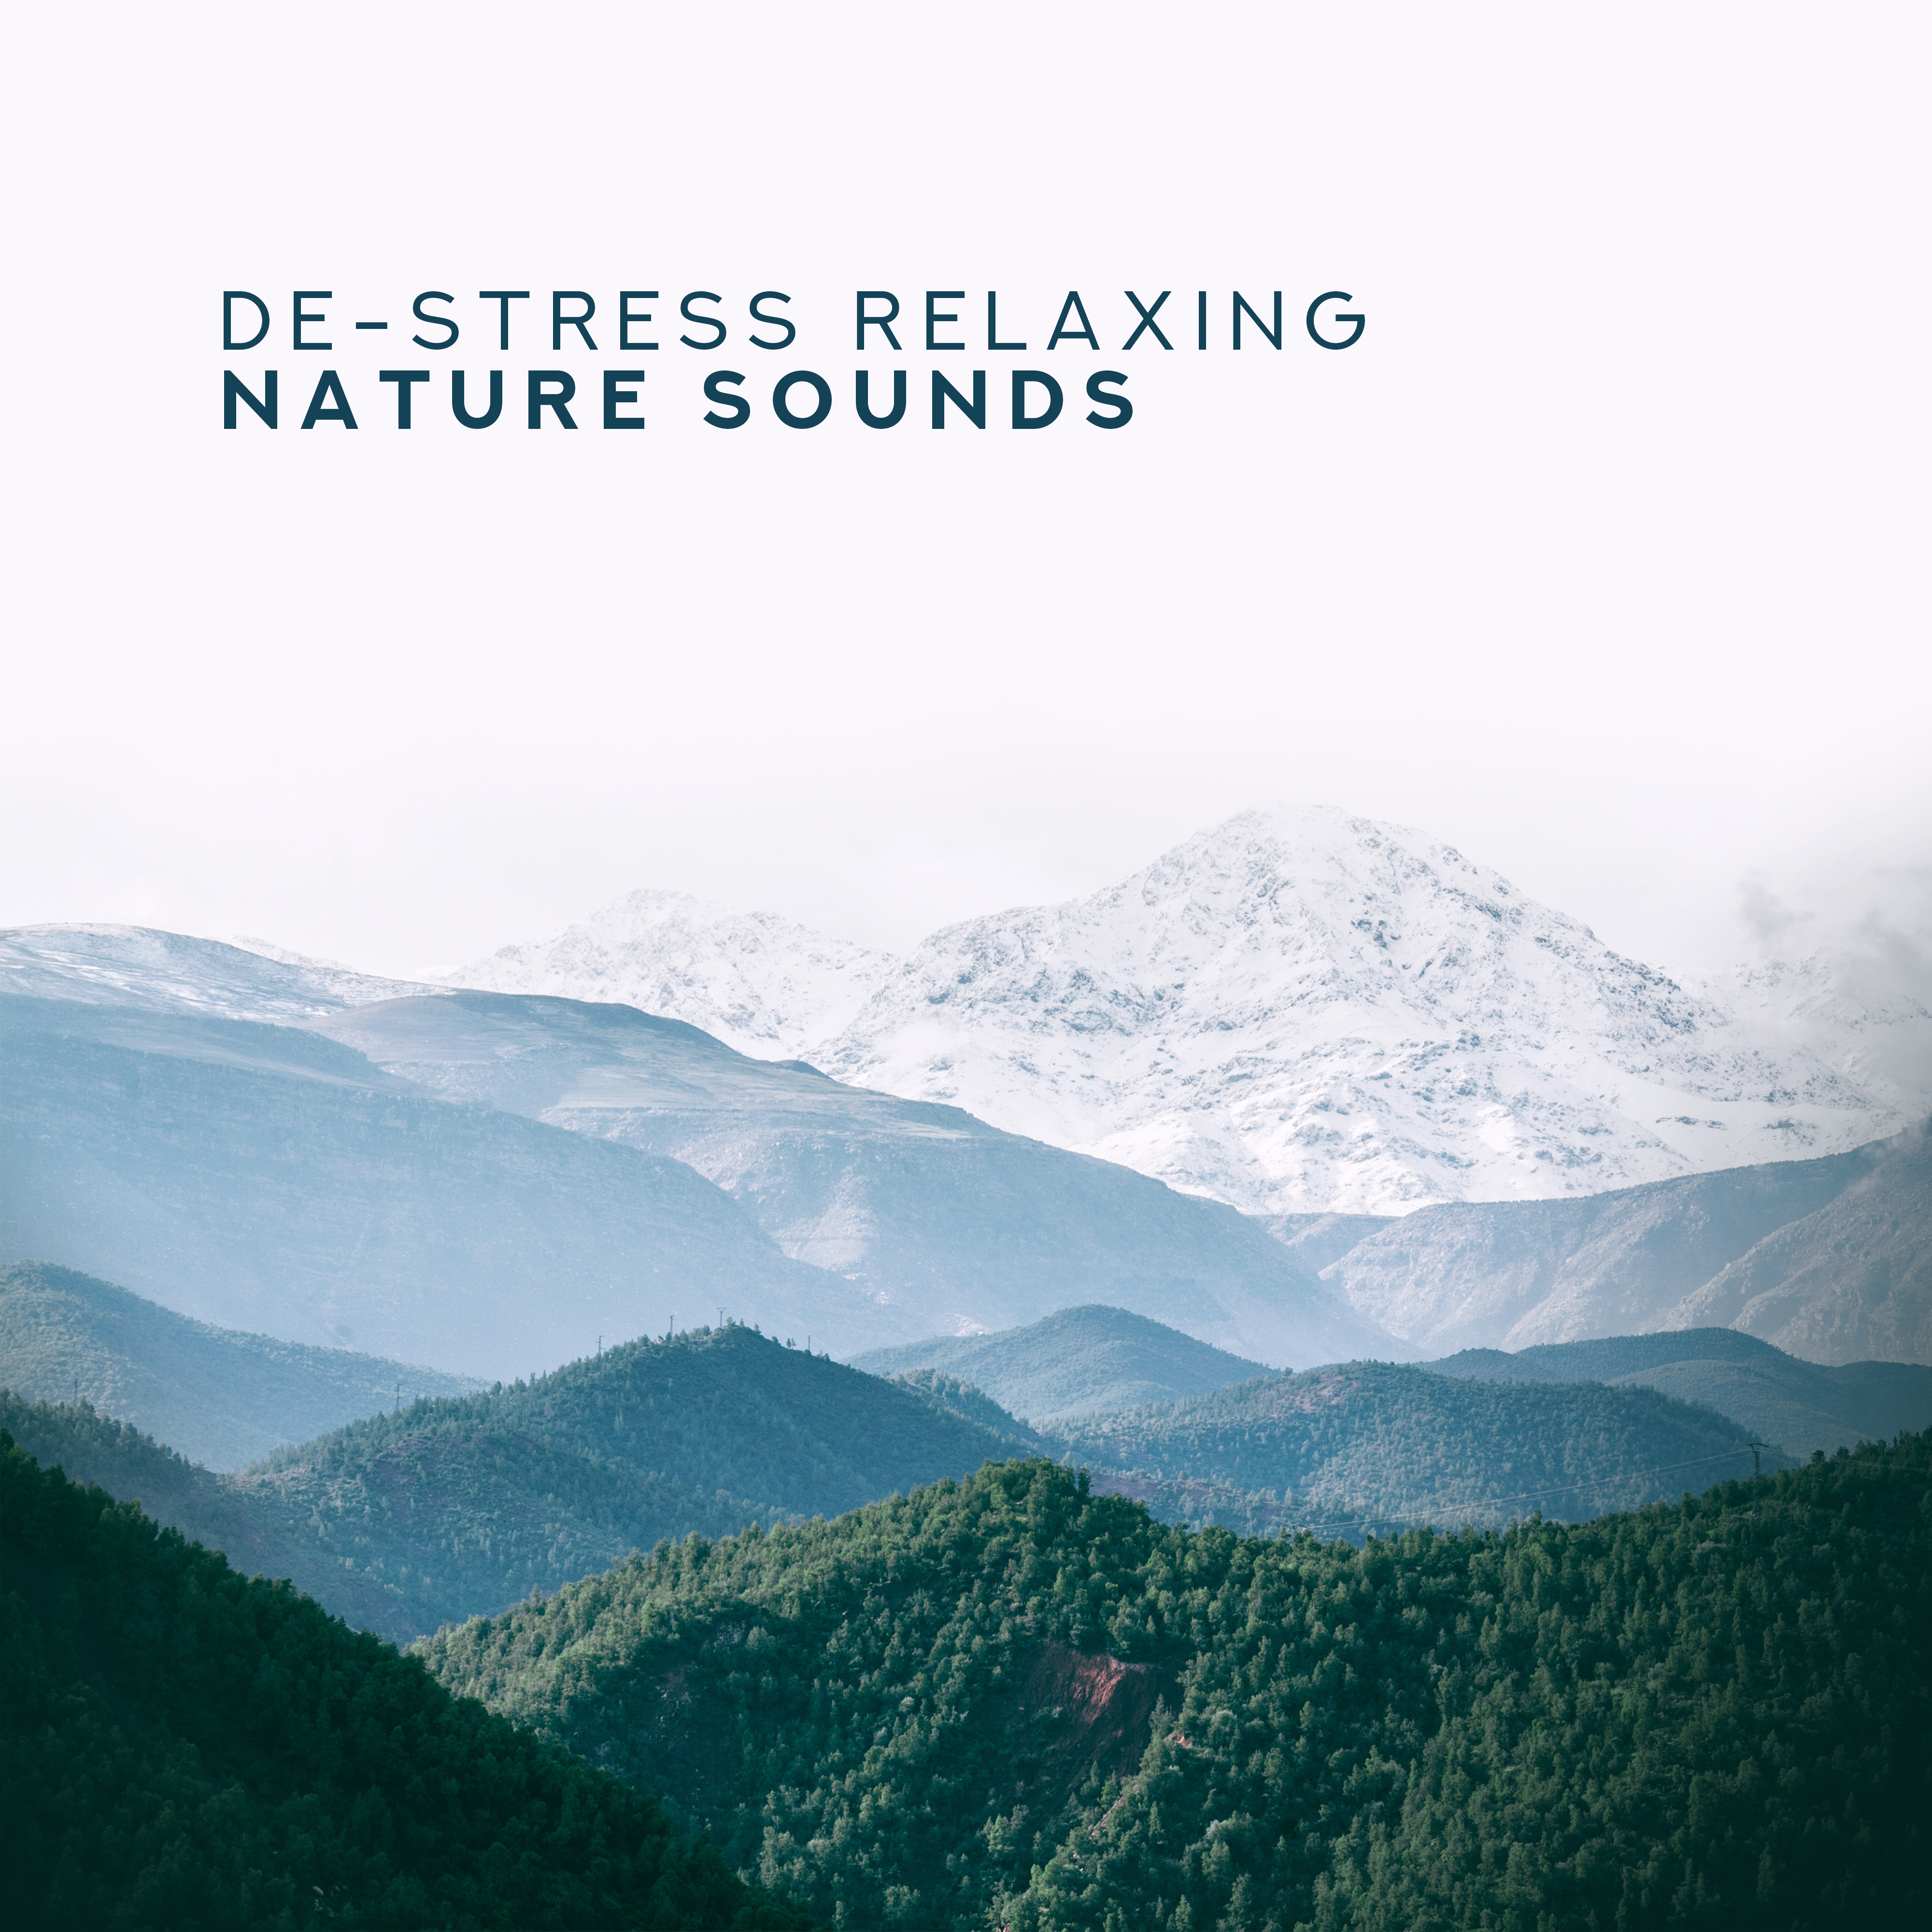 De-Stress Relaxing Nature Sounds – New Age Music Compilation for Full Calm Down, Healing Therapy, Stress Relief